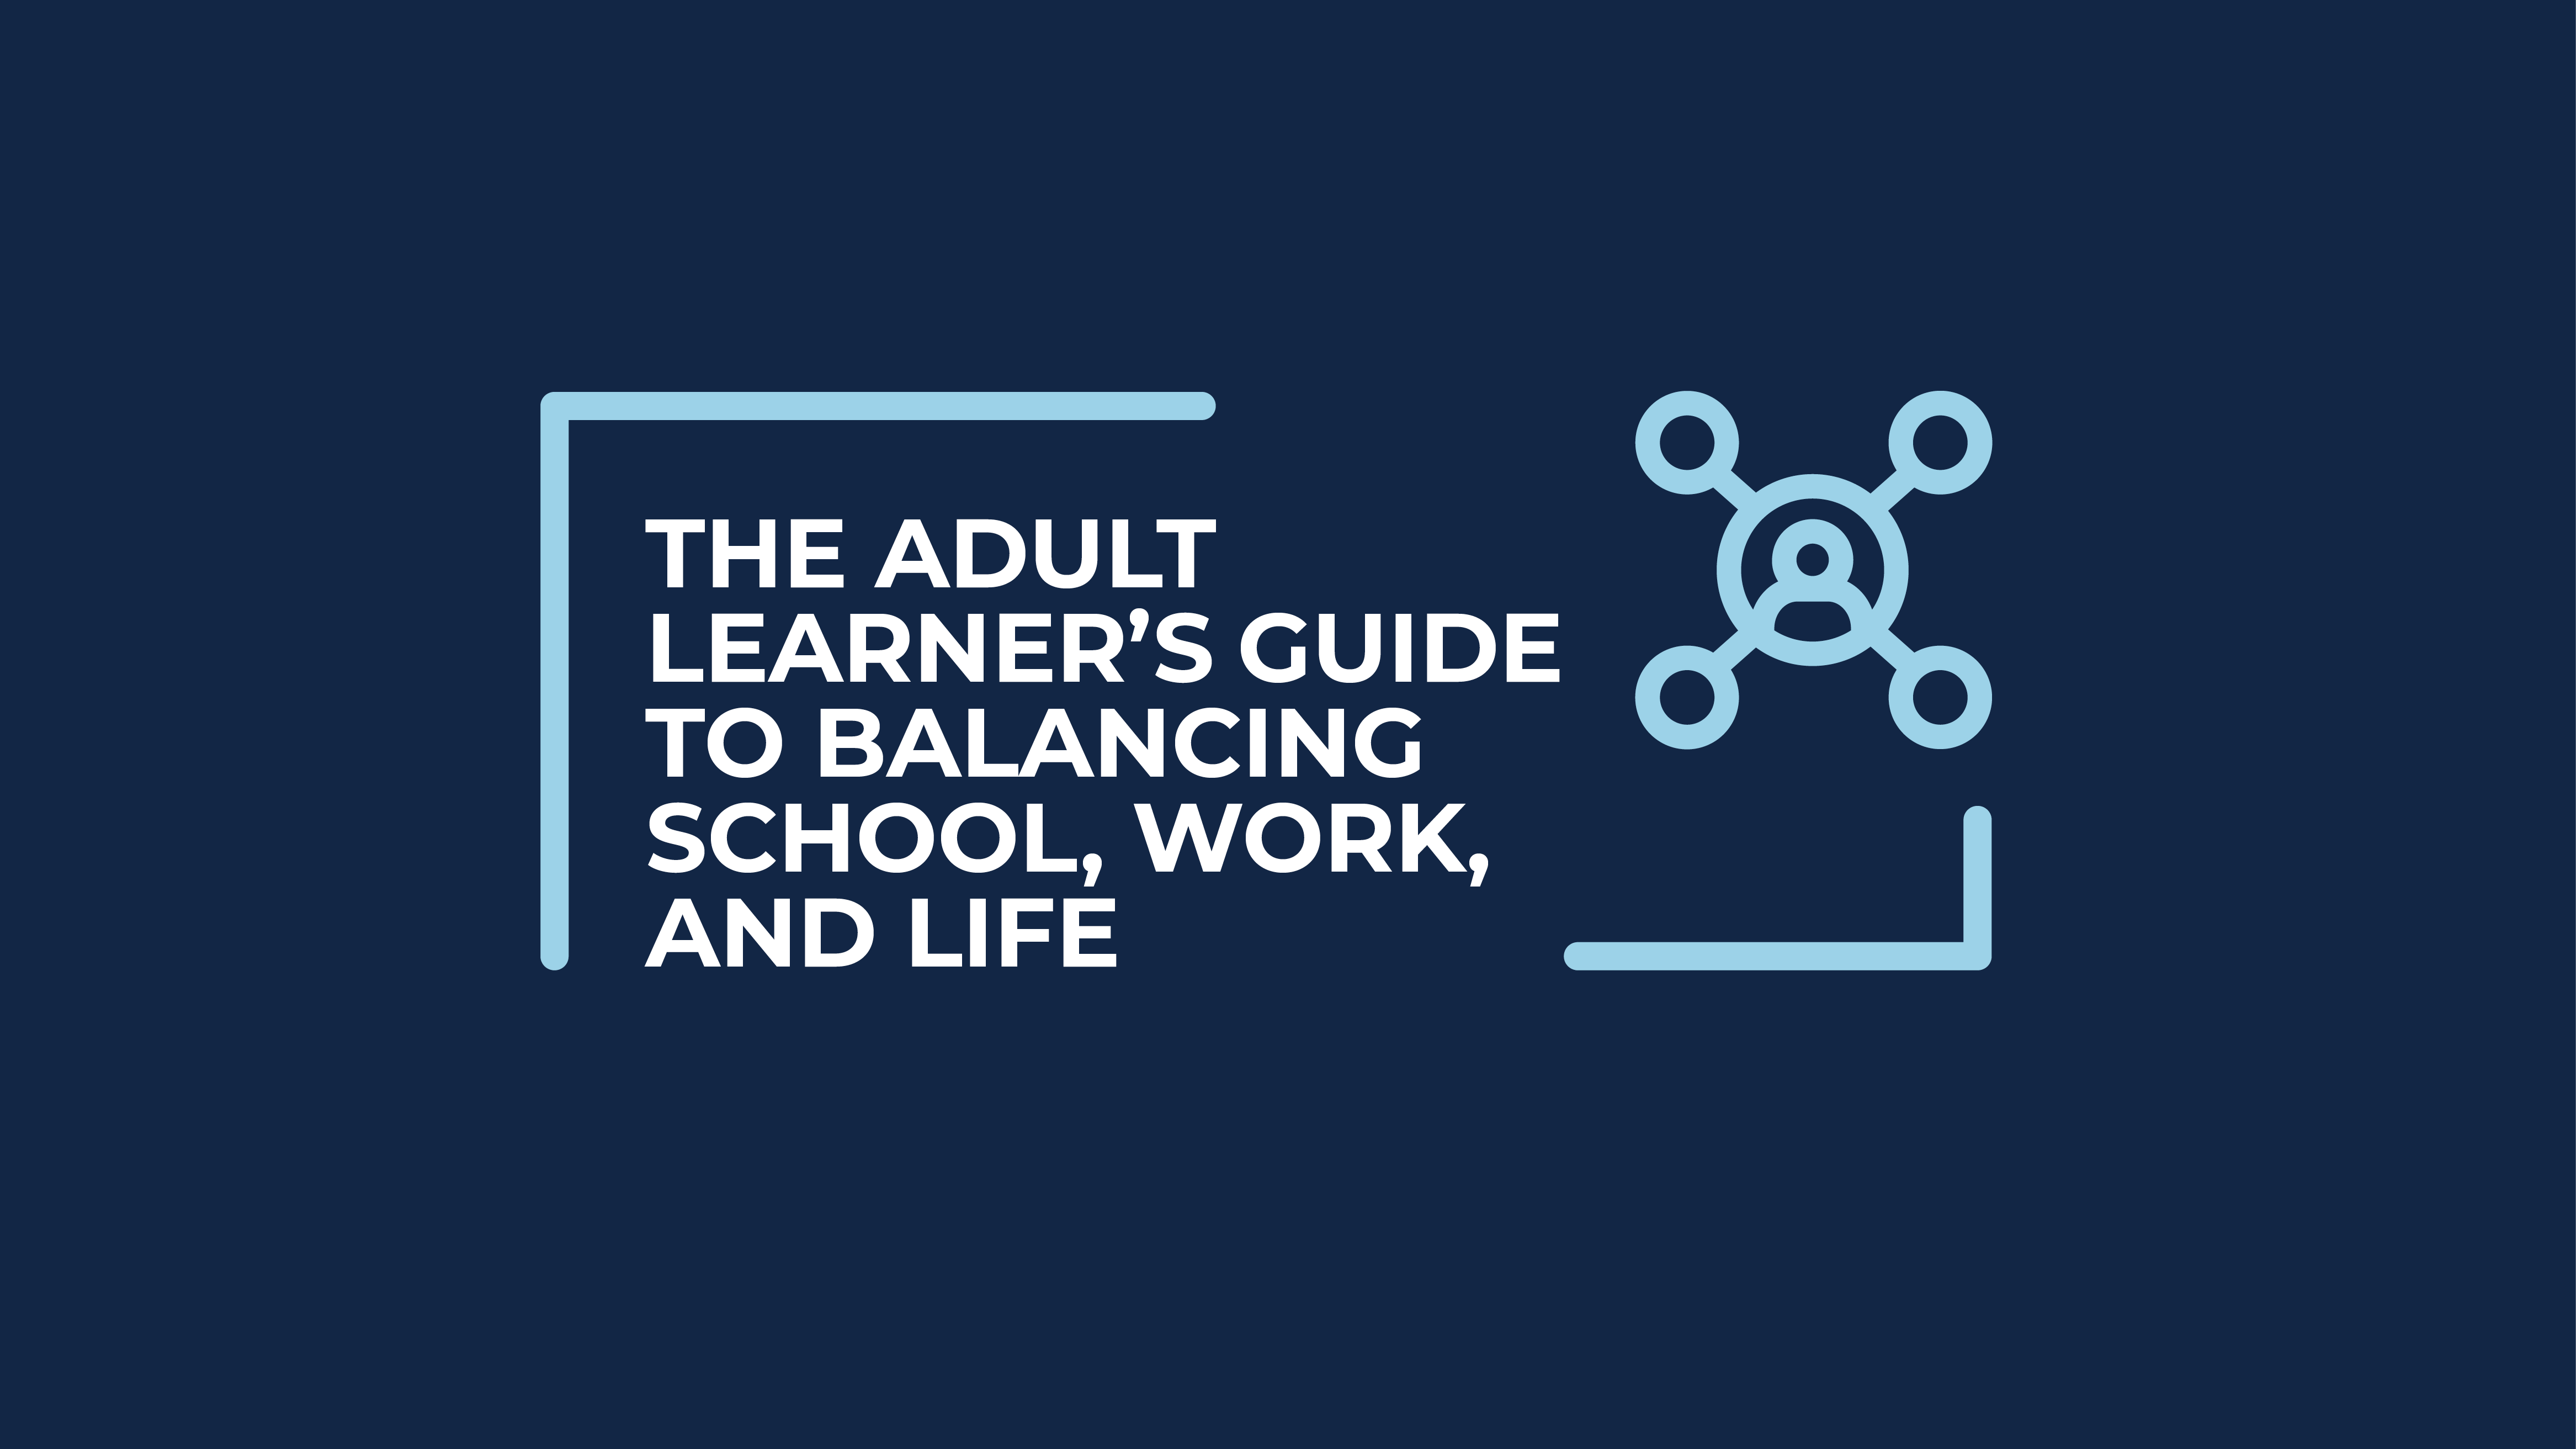 The Complete Guide To Great Balance For Older Adults — More Life